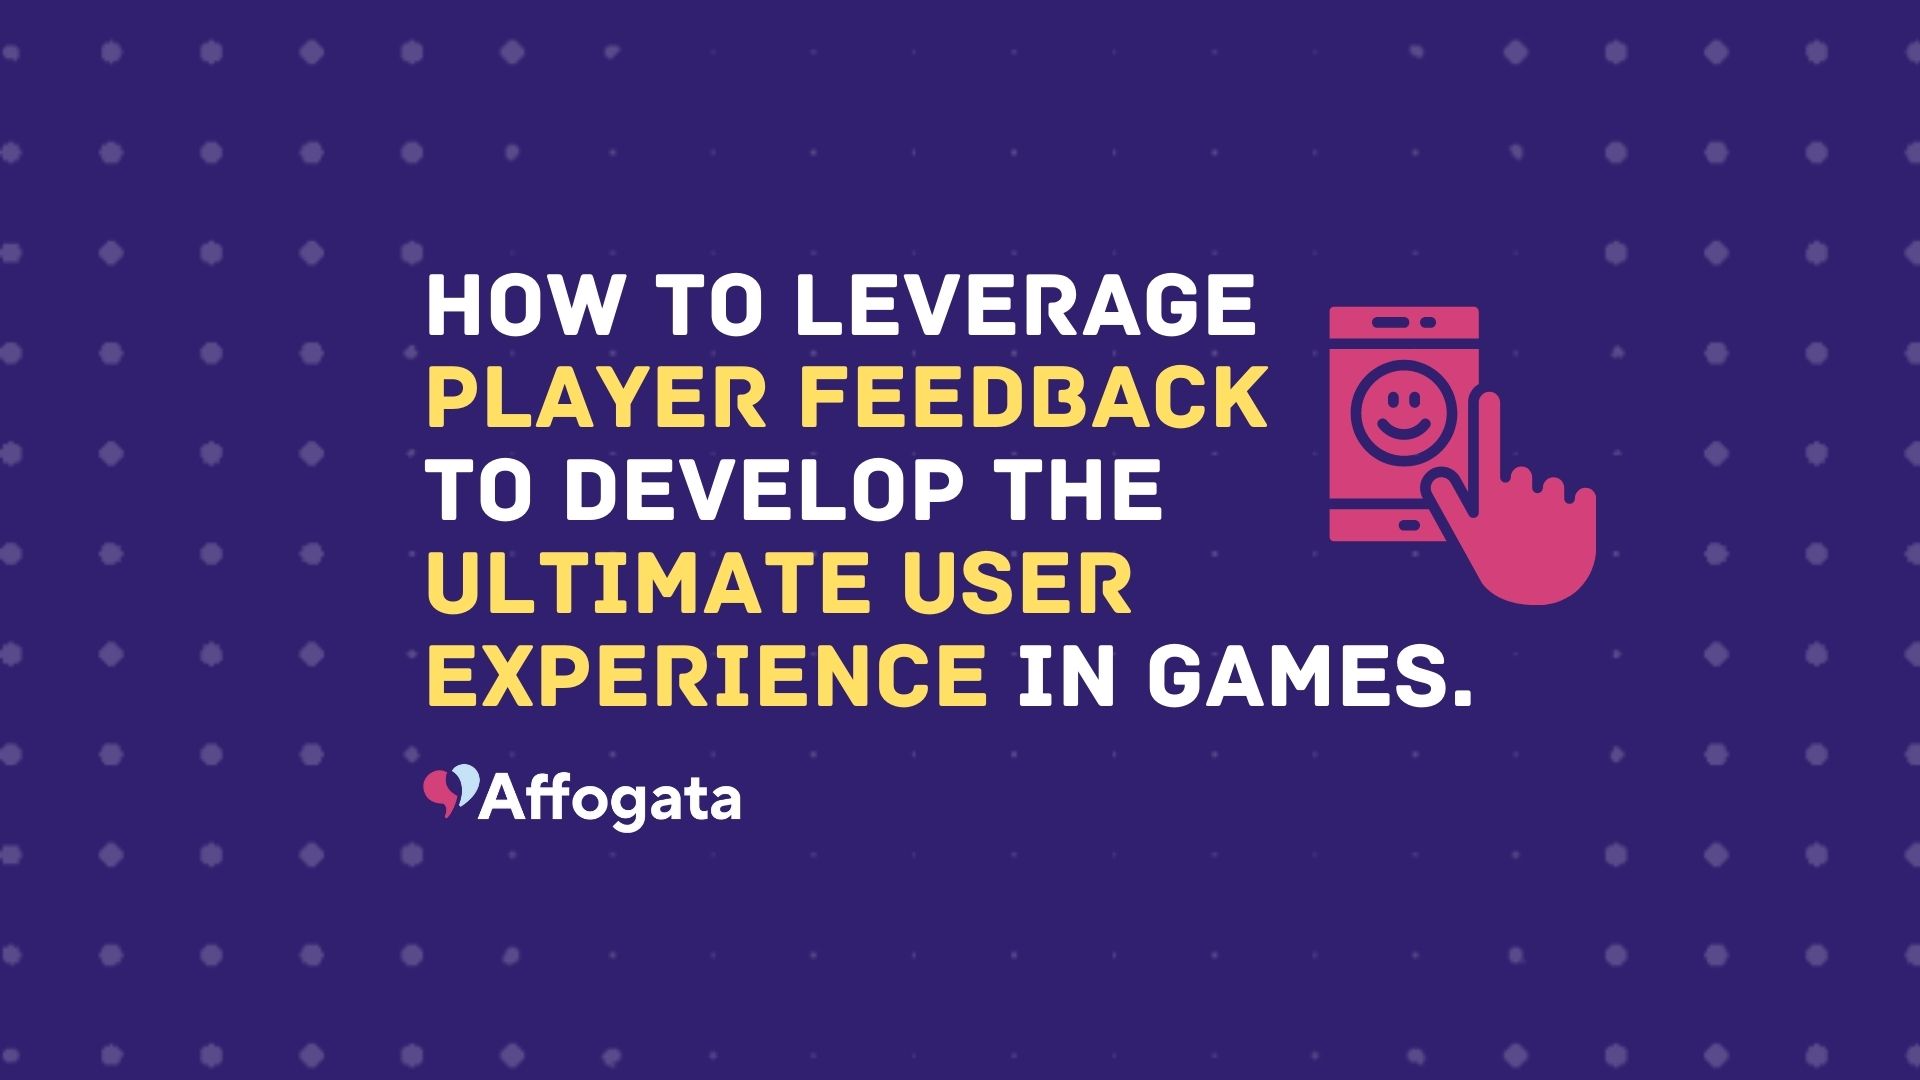 How to leverage player feedback to develop the ultimate user experience in games